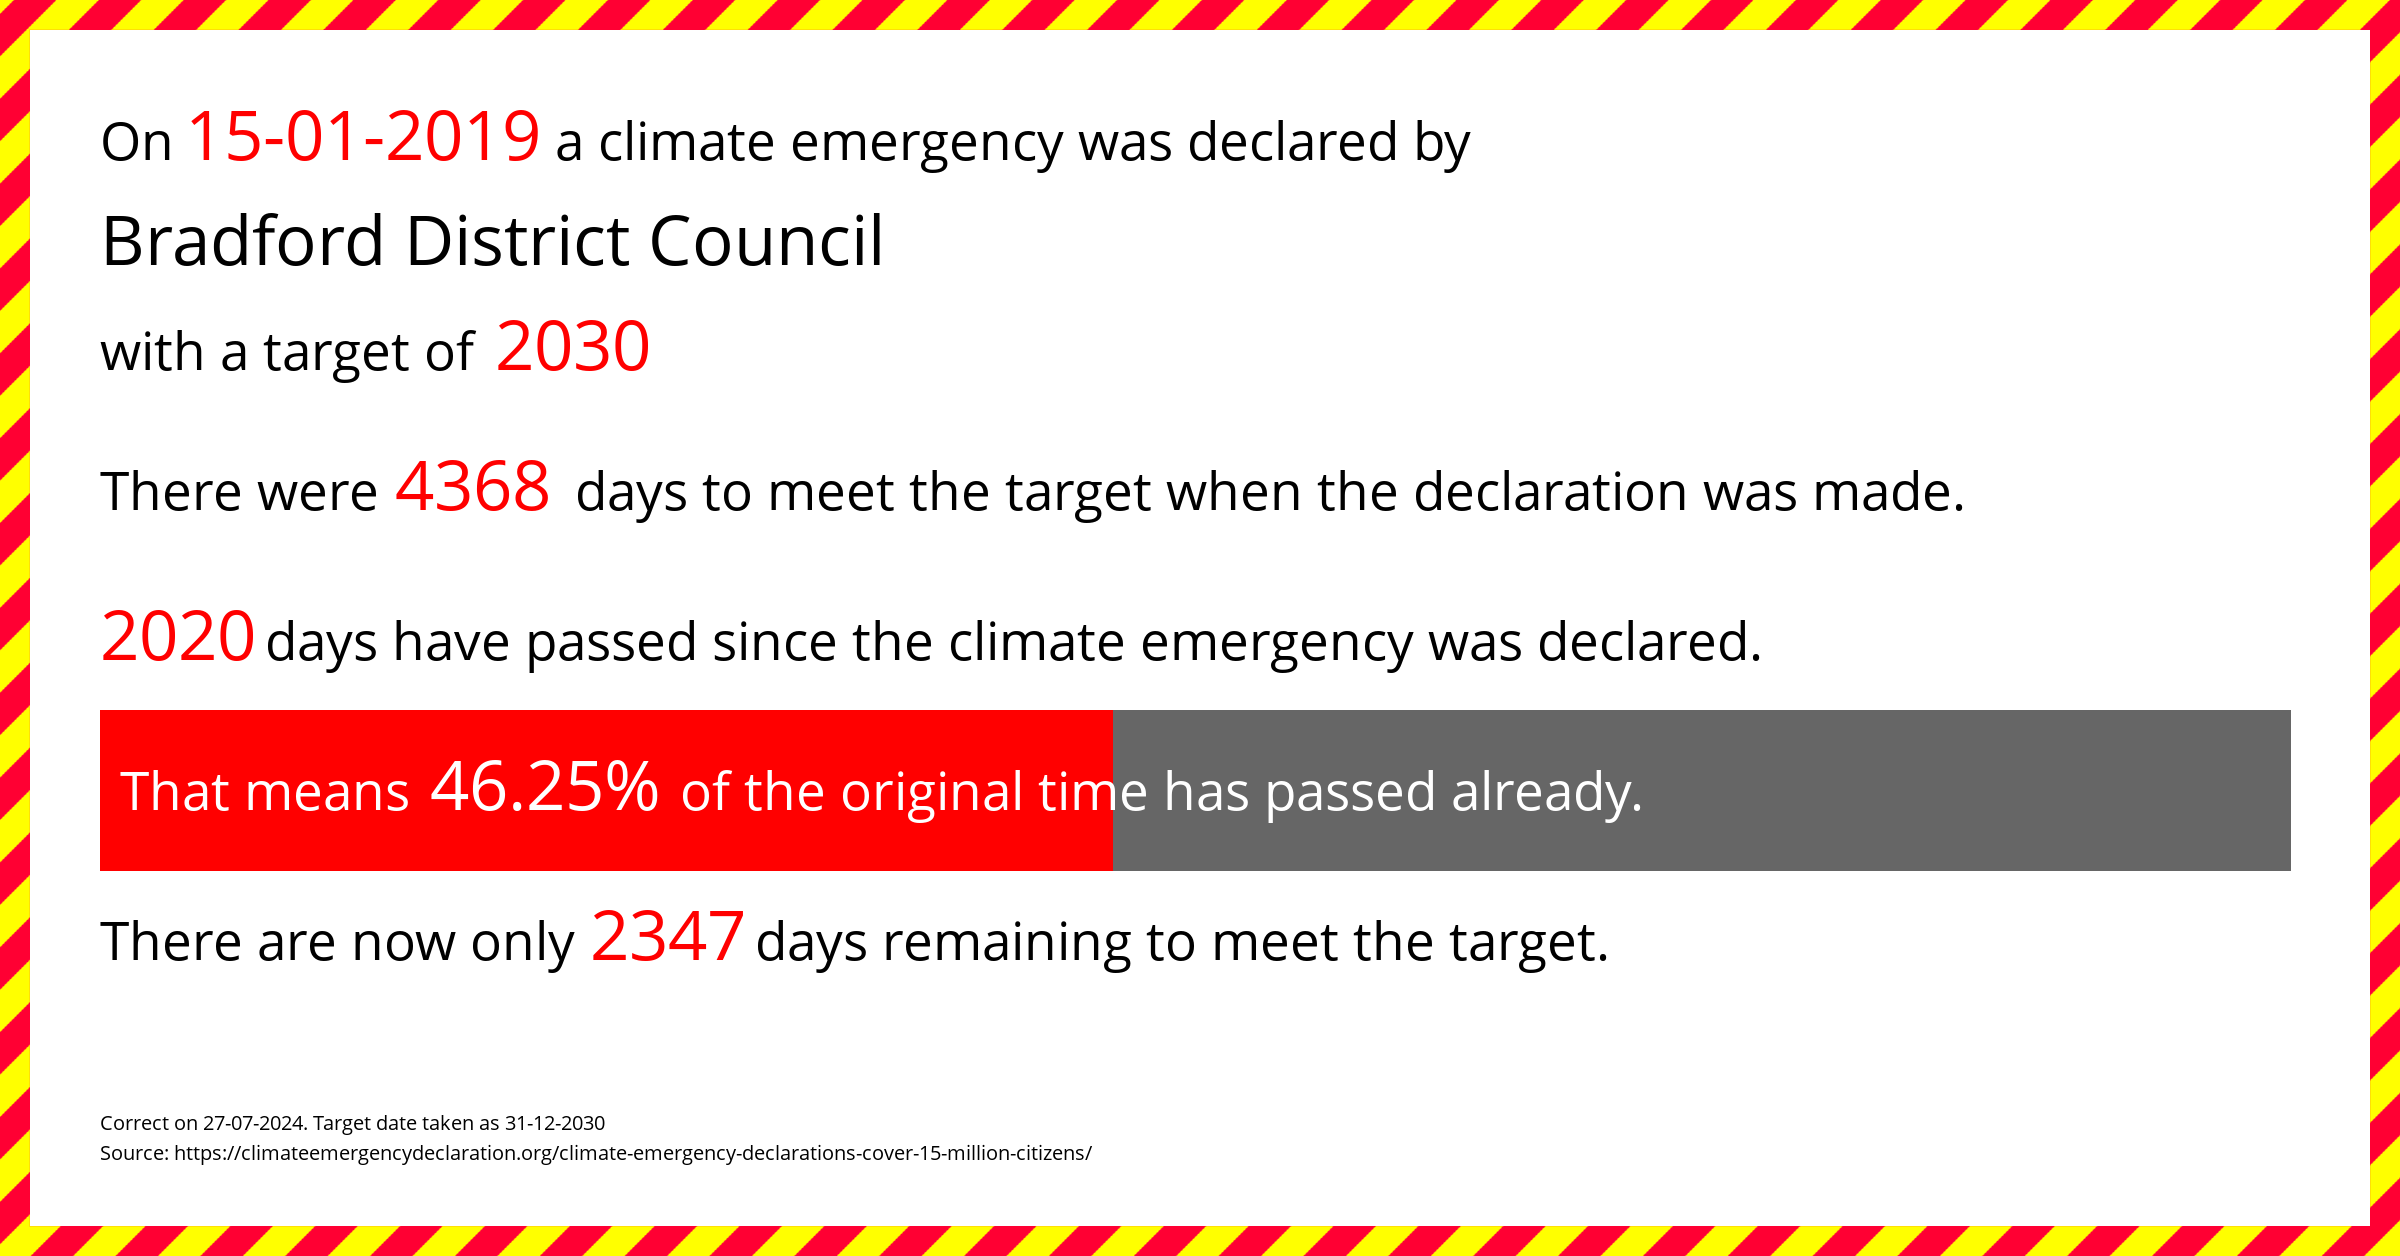 Bradford District Council declared a Climate emergency on Tuesday 15th January 2019, with a target of 2030.